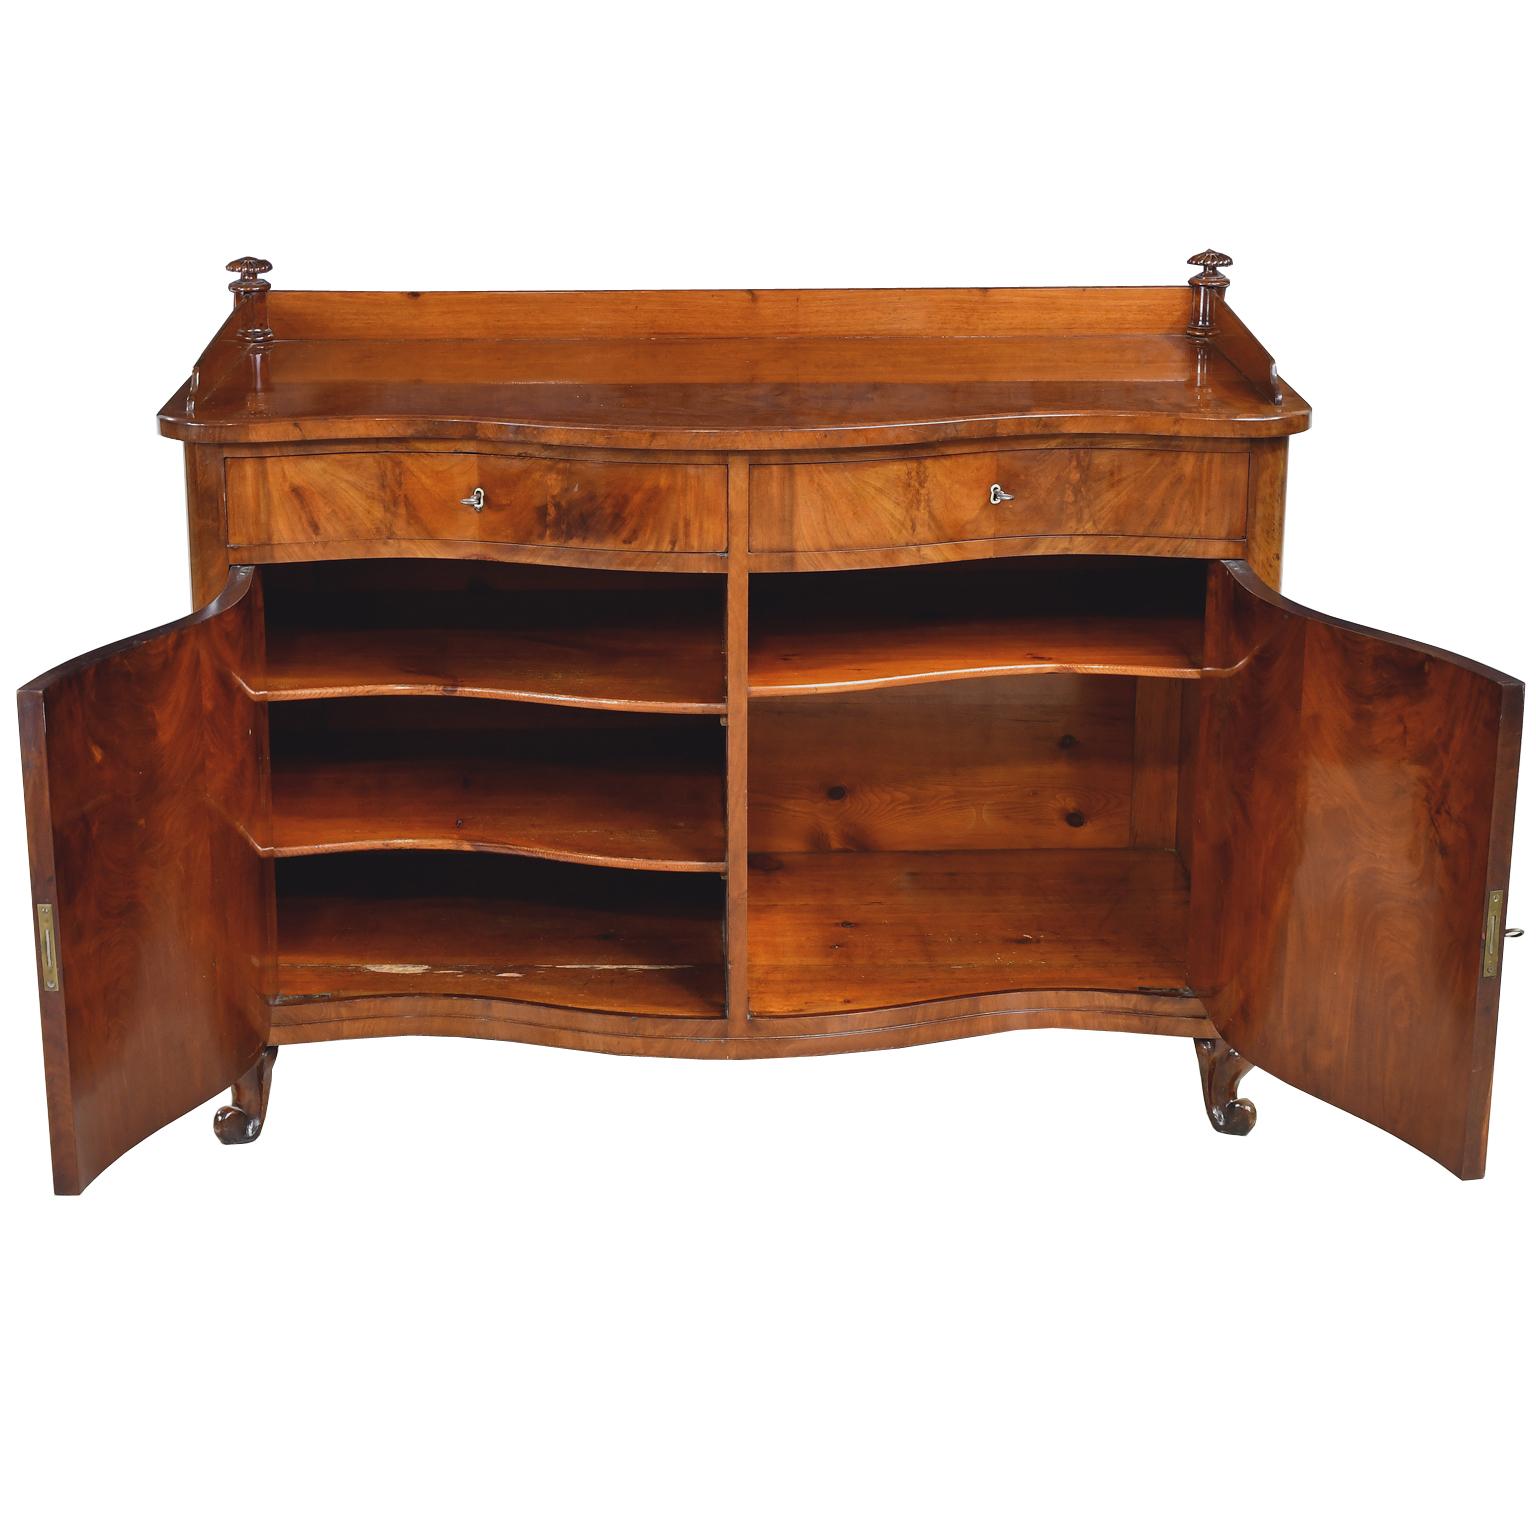 Christian VIII Serpentine-Front Sideboard in West Indies Mahogany, circa 1850 For Sale 3